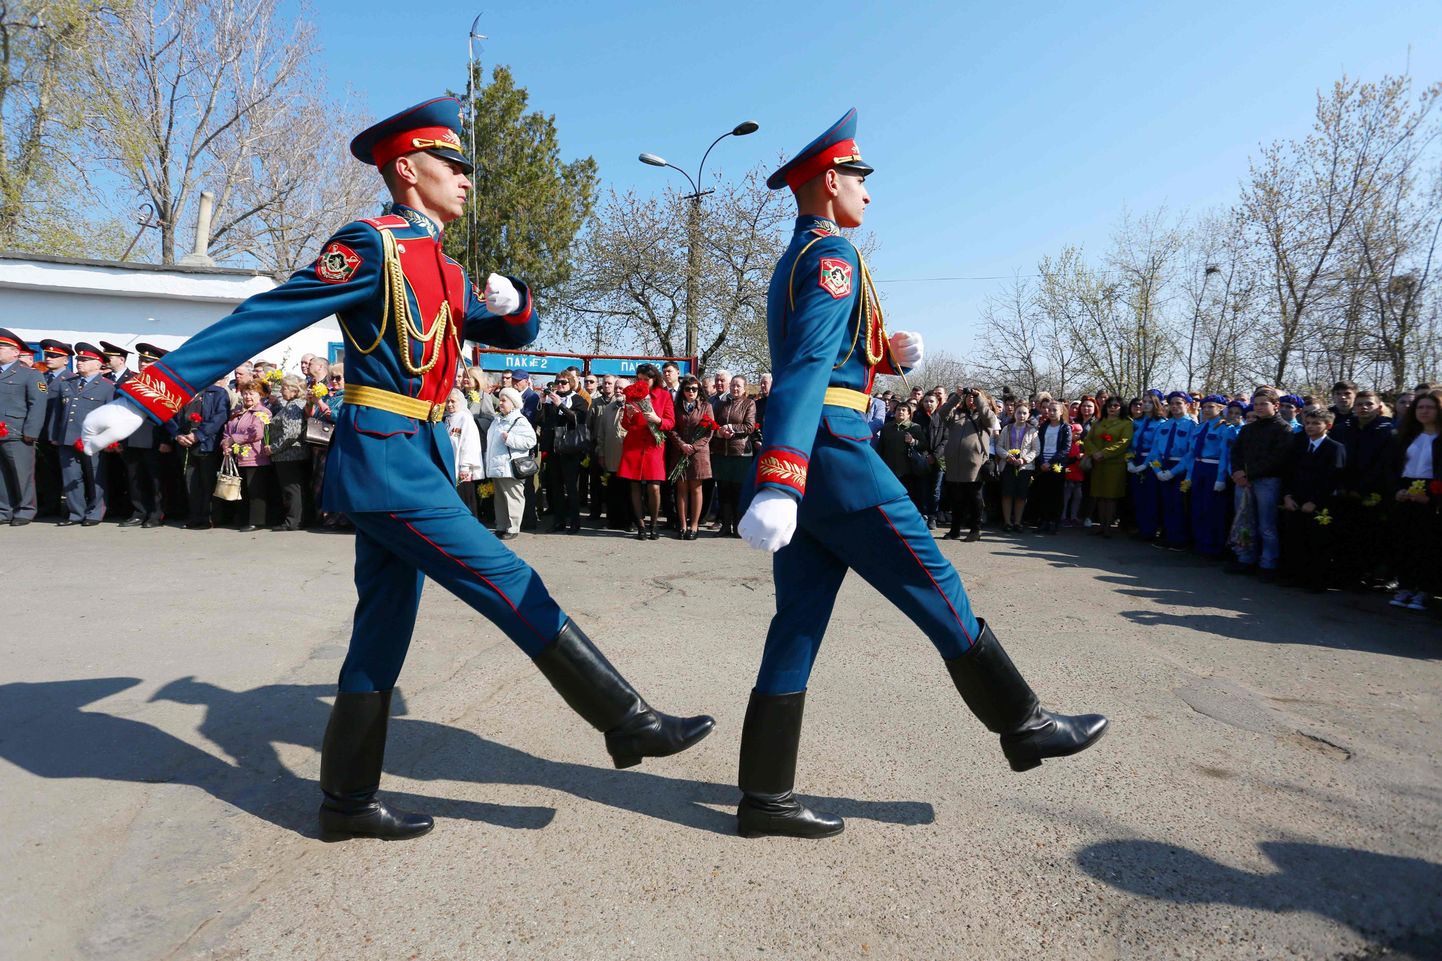 Soldiers march a people mark 'Day of Republic' in the center of Tiraspol, capital of self-proclaimed Moldovan Republic of Transnistria on April 1, 2017.

Kiev has long suspected that Russia never intended to seize Ukraine's east but to create a "frozen conflict": a festering wound that allows the Kremlin to meddle at will and hamper any moves closer to the West.
The scenario has been repeated before when Moscow decided to support two breakaway regions in ex-Soviet Georgia. / AFP PHOTO / Aleksey FILIPPOV